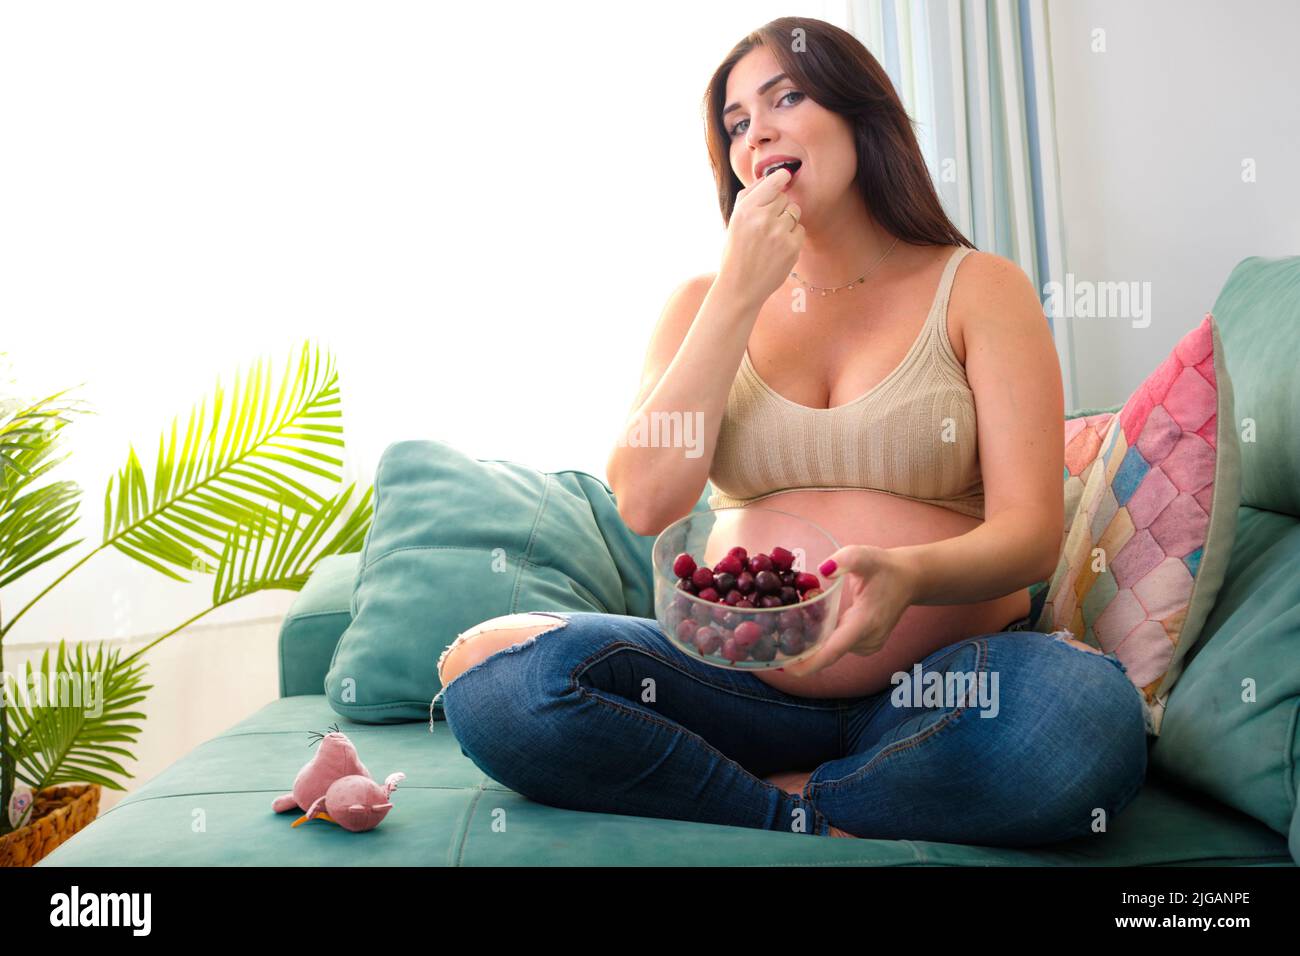 Pregnant young woman eating chips on the sofa at home. Food and cravings during pregnancy. Stock Photo